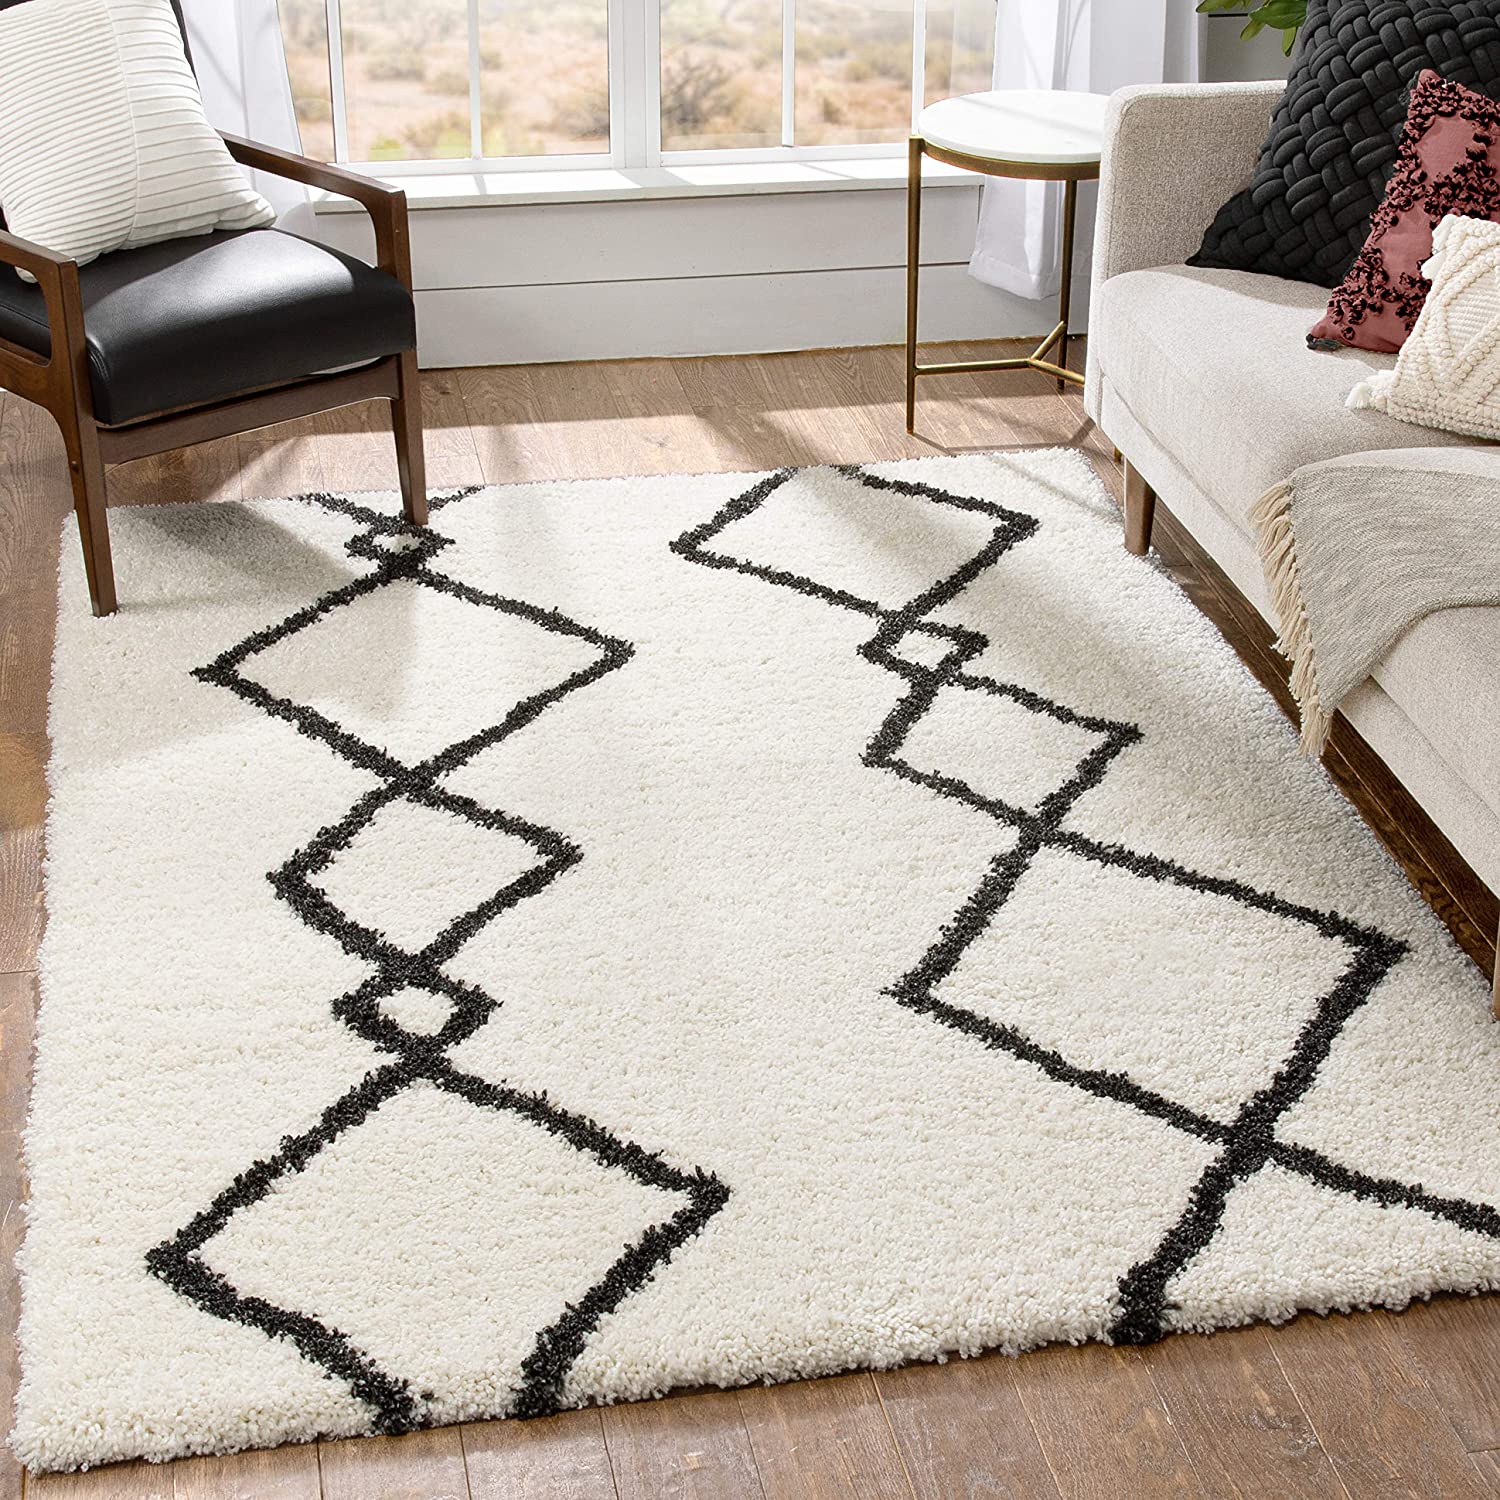 shaggy Scandinavian rug with moroccan diamond pattern black and white hygge decor inspiration